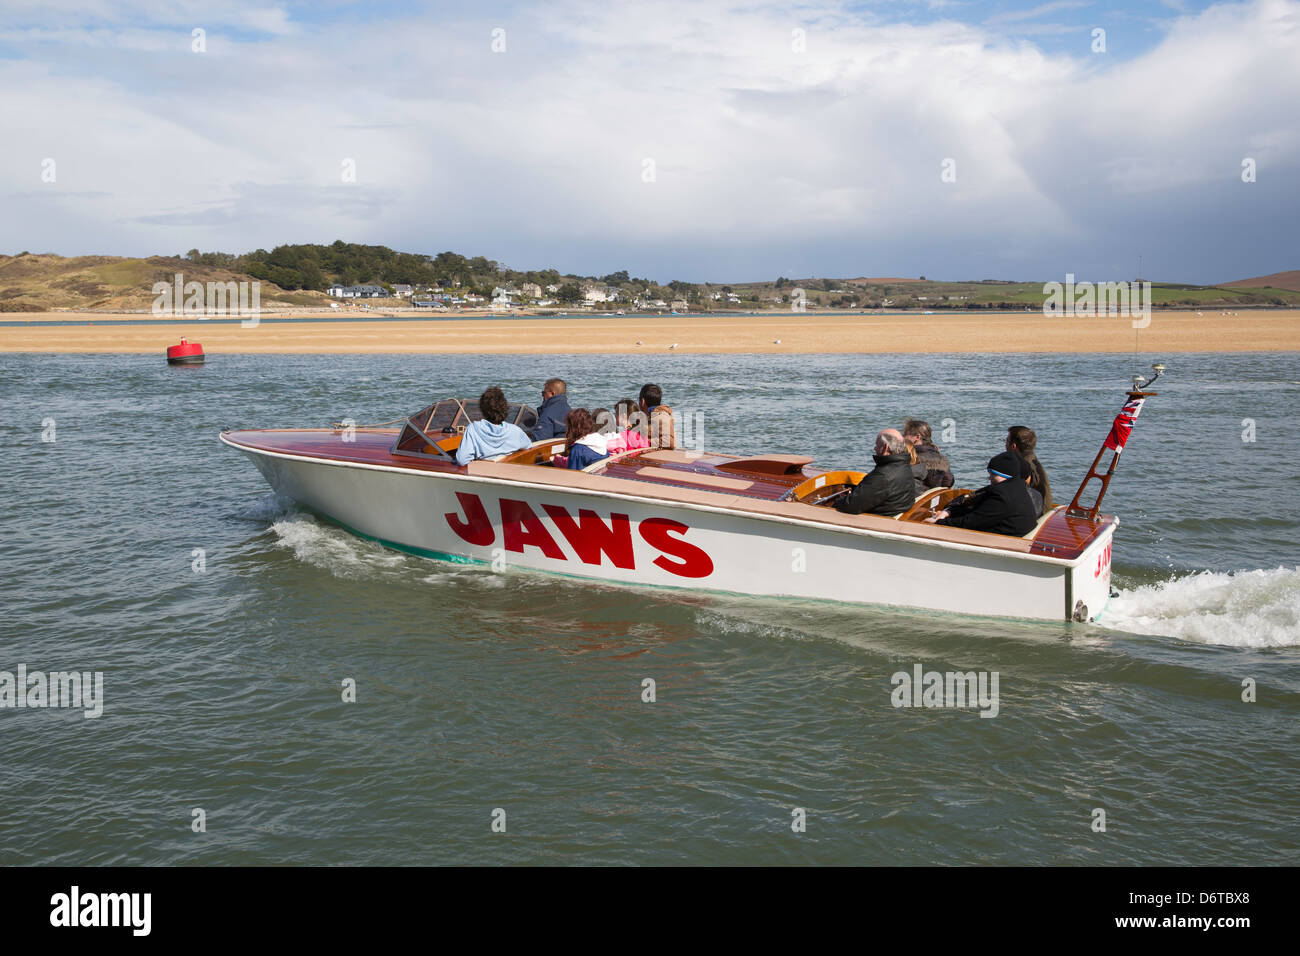 speed boat named Jaws, Rock Cornwall Stock Photo